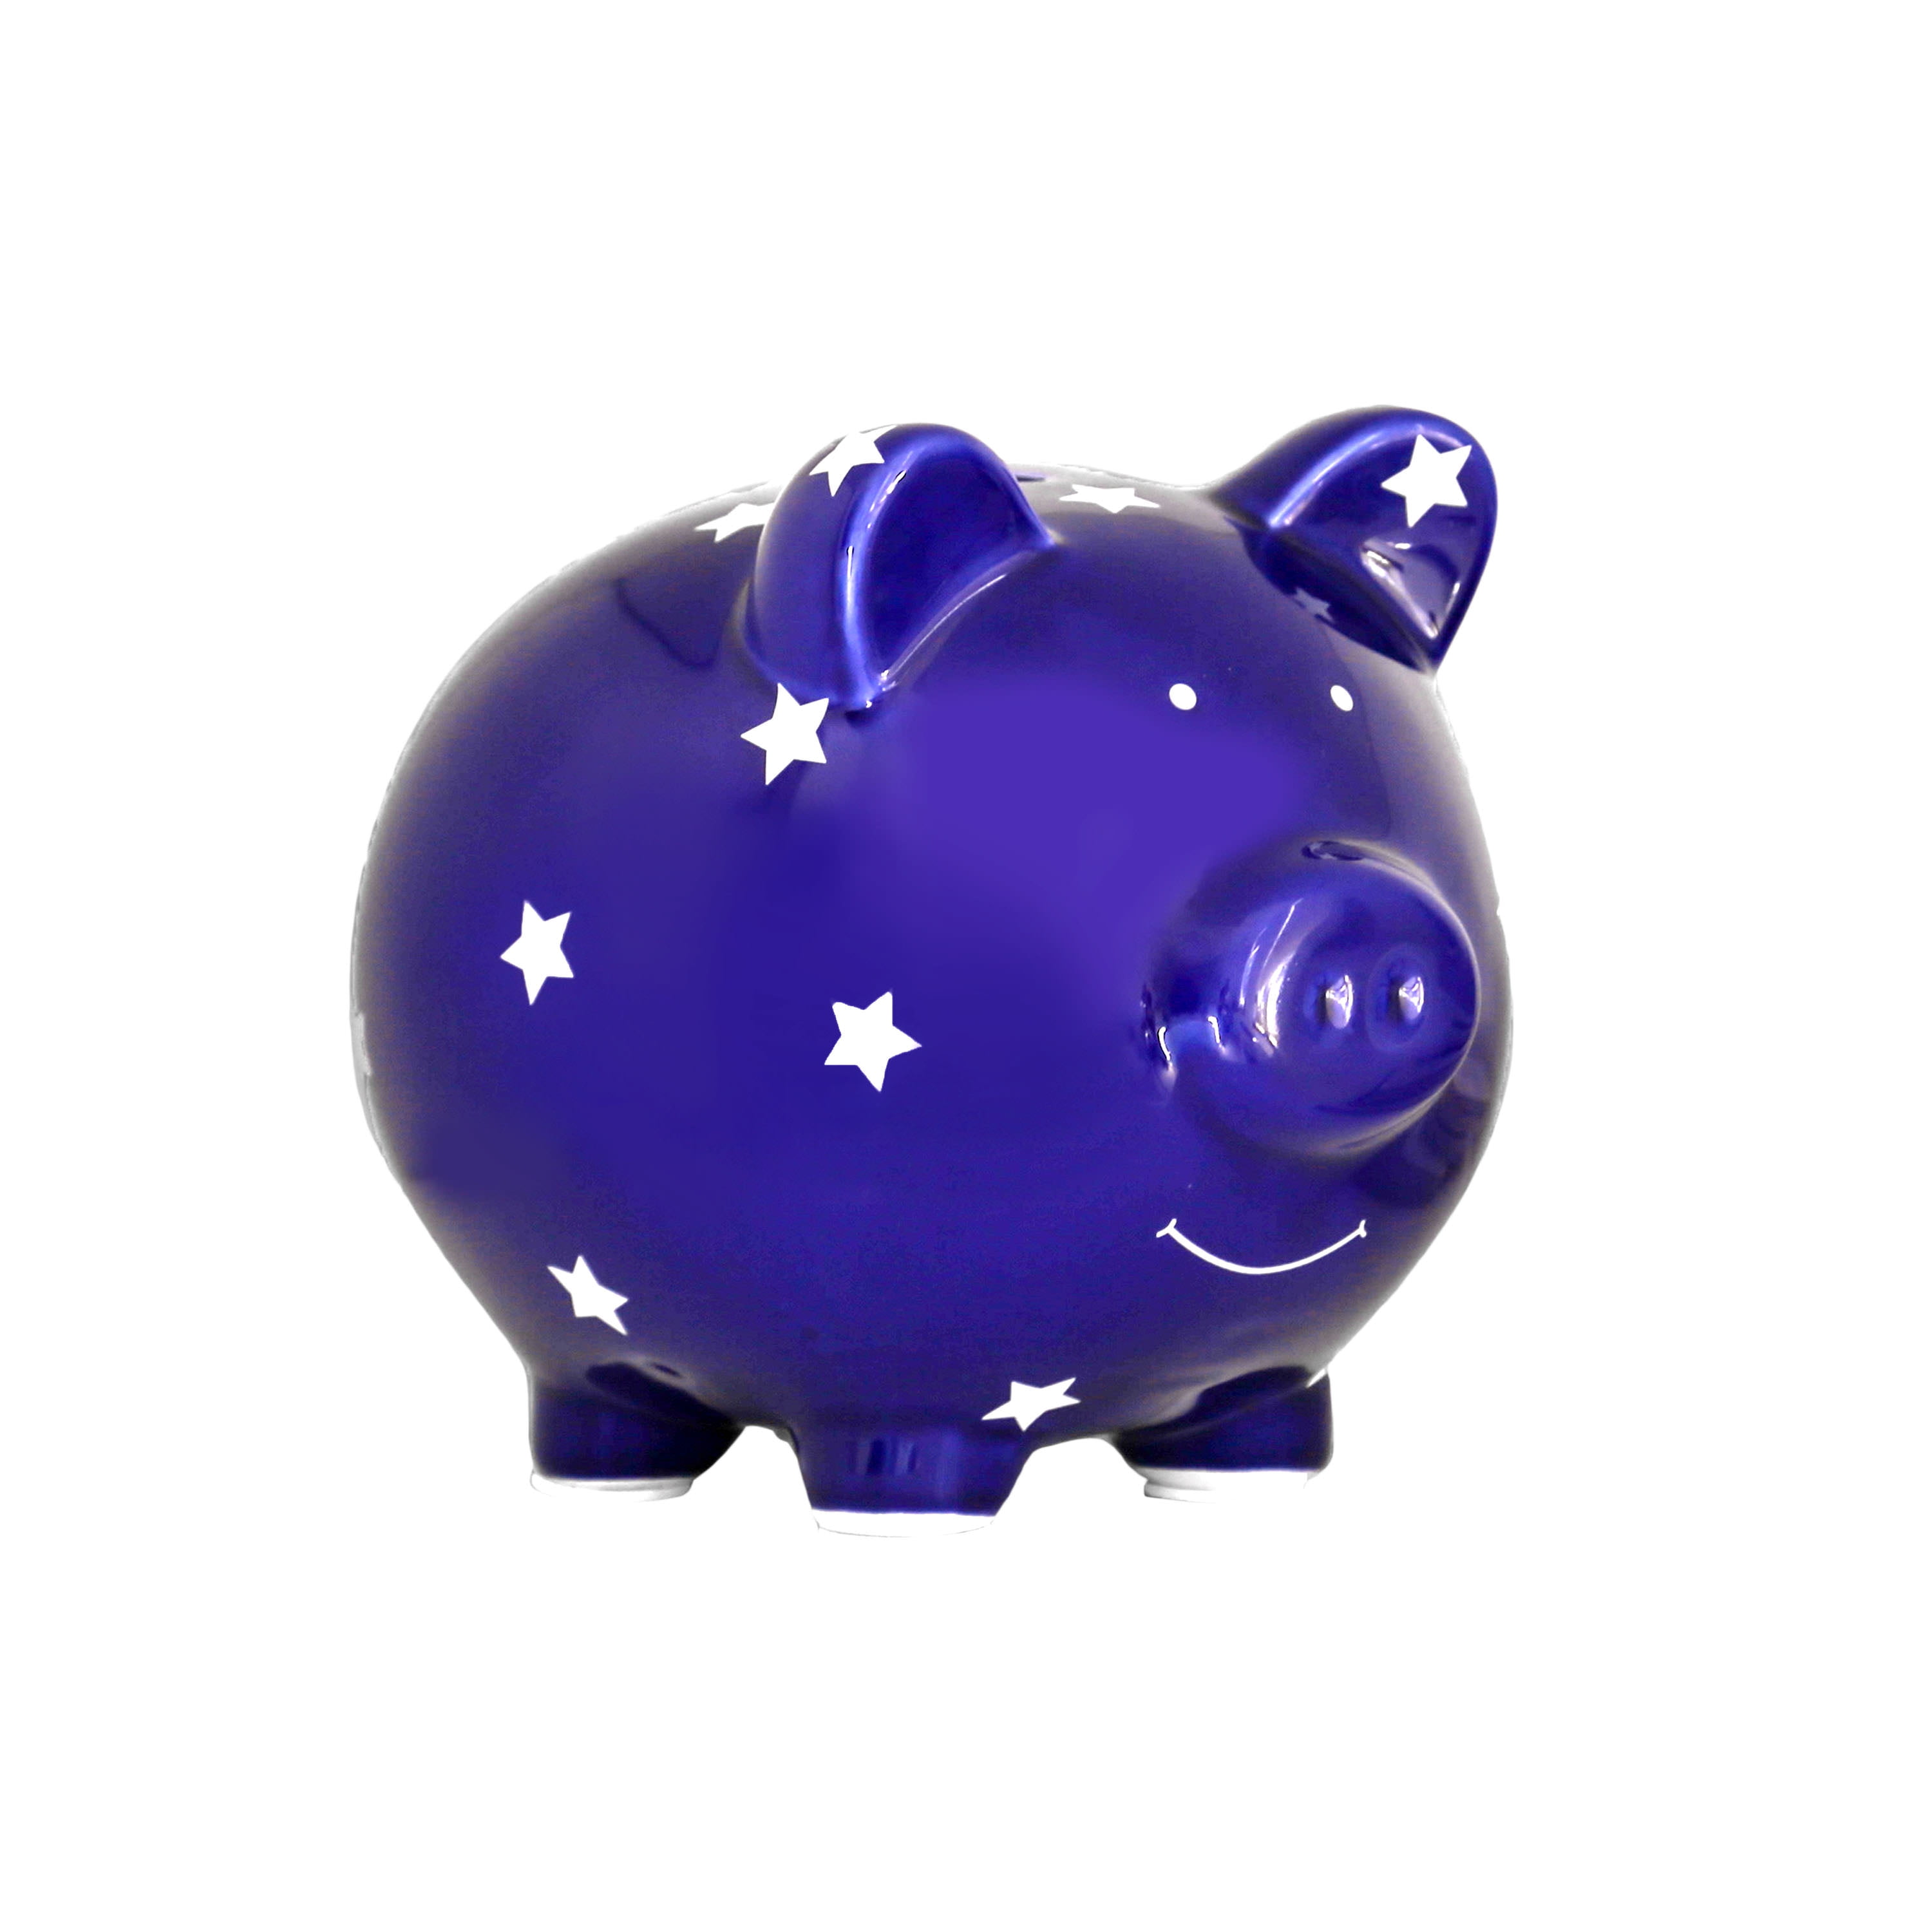 Truu Design 6 x 5 inches White Cute Novelty Pig Money Bank for Kids